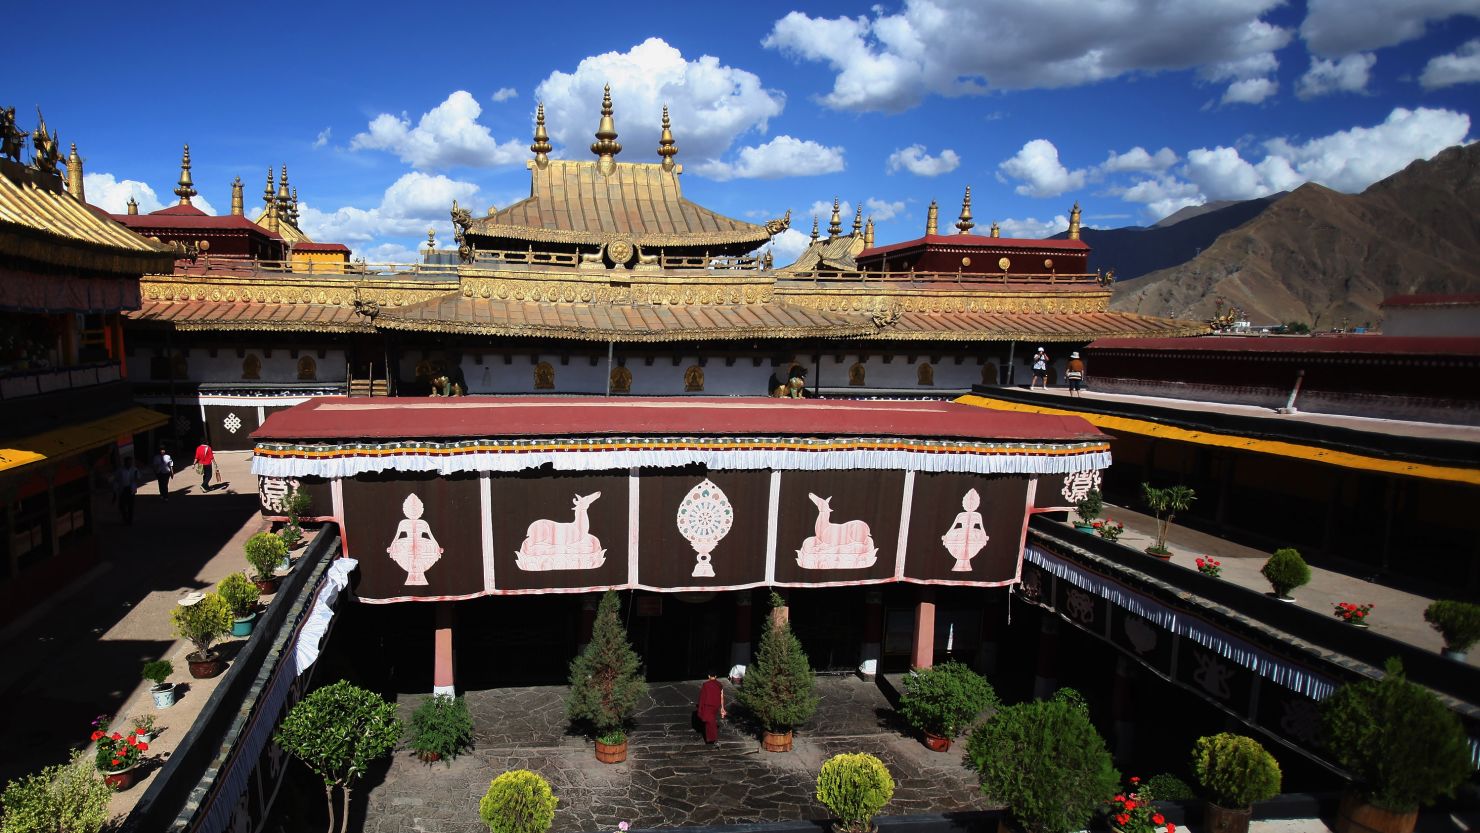 A Tibetan temple. Tibetan doctors think we get sick when our physical, psychological and spiritual well-being are out of balance.